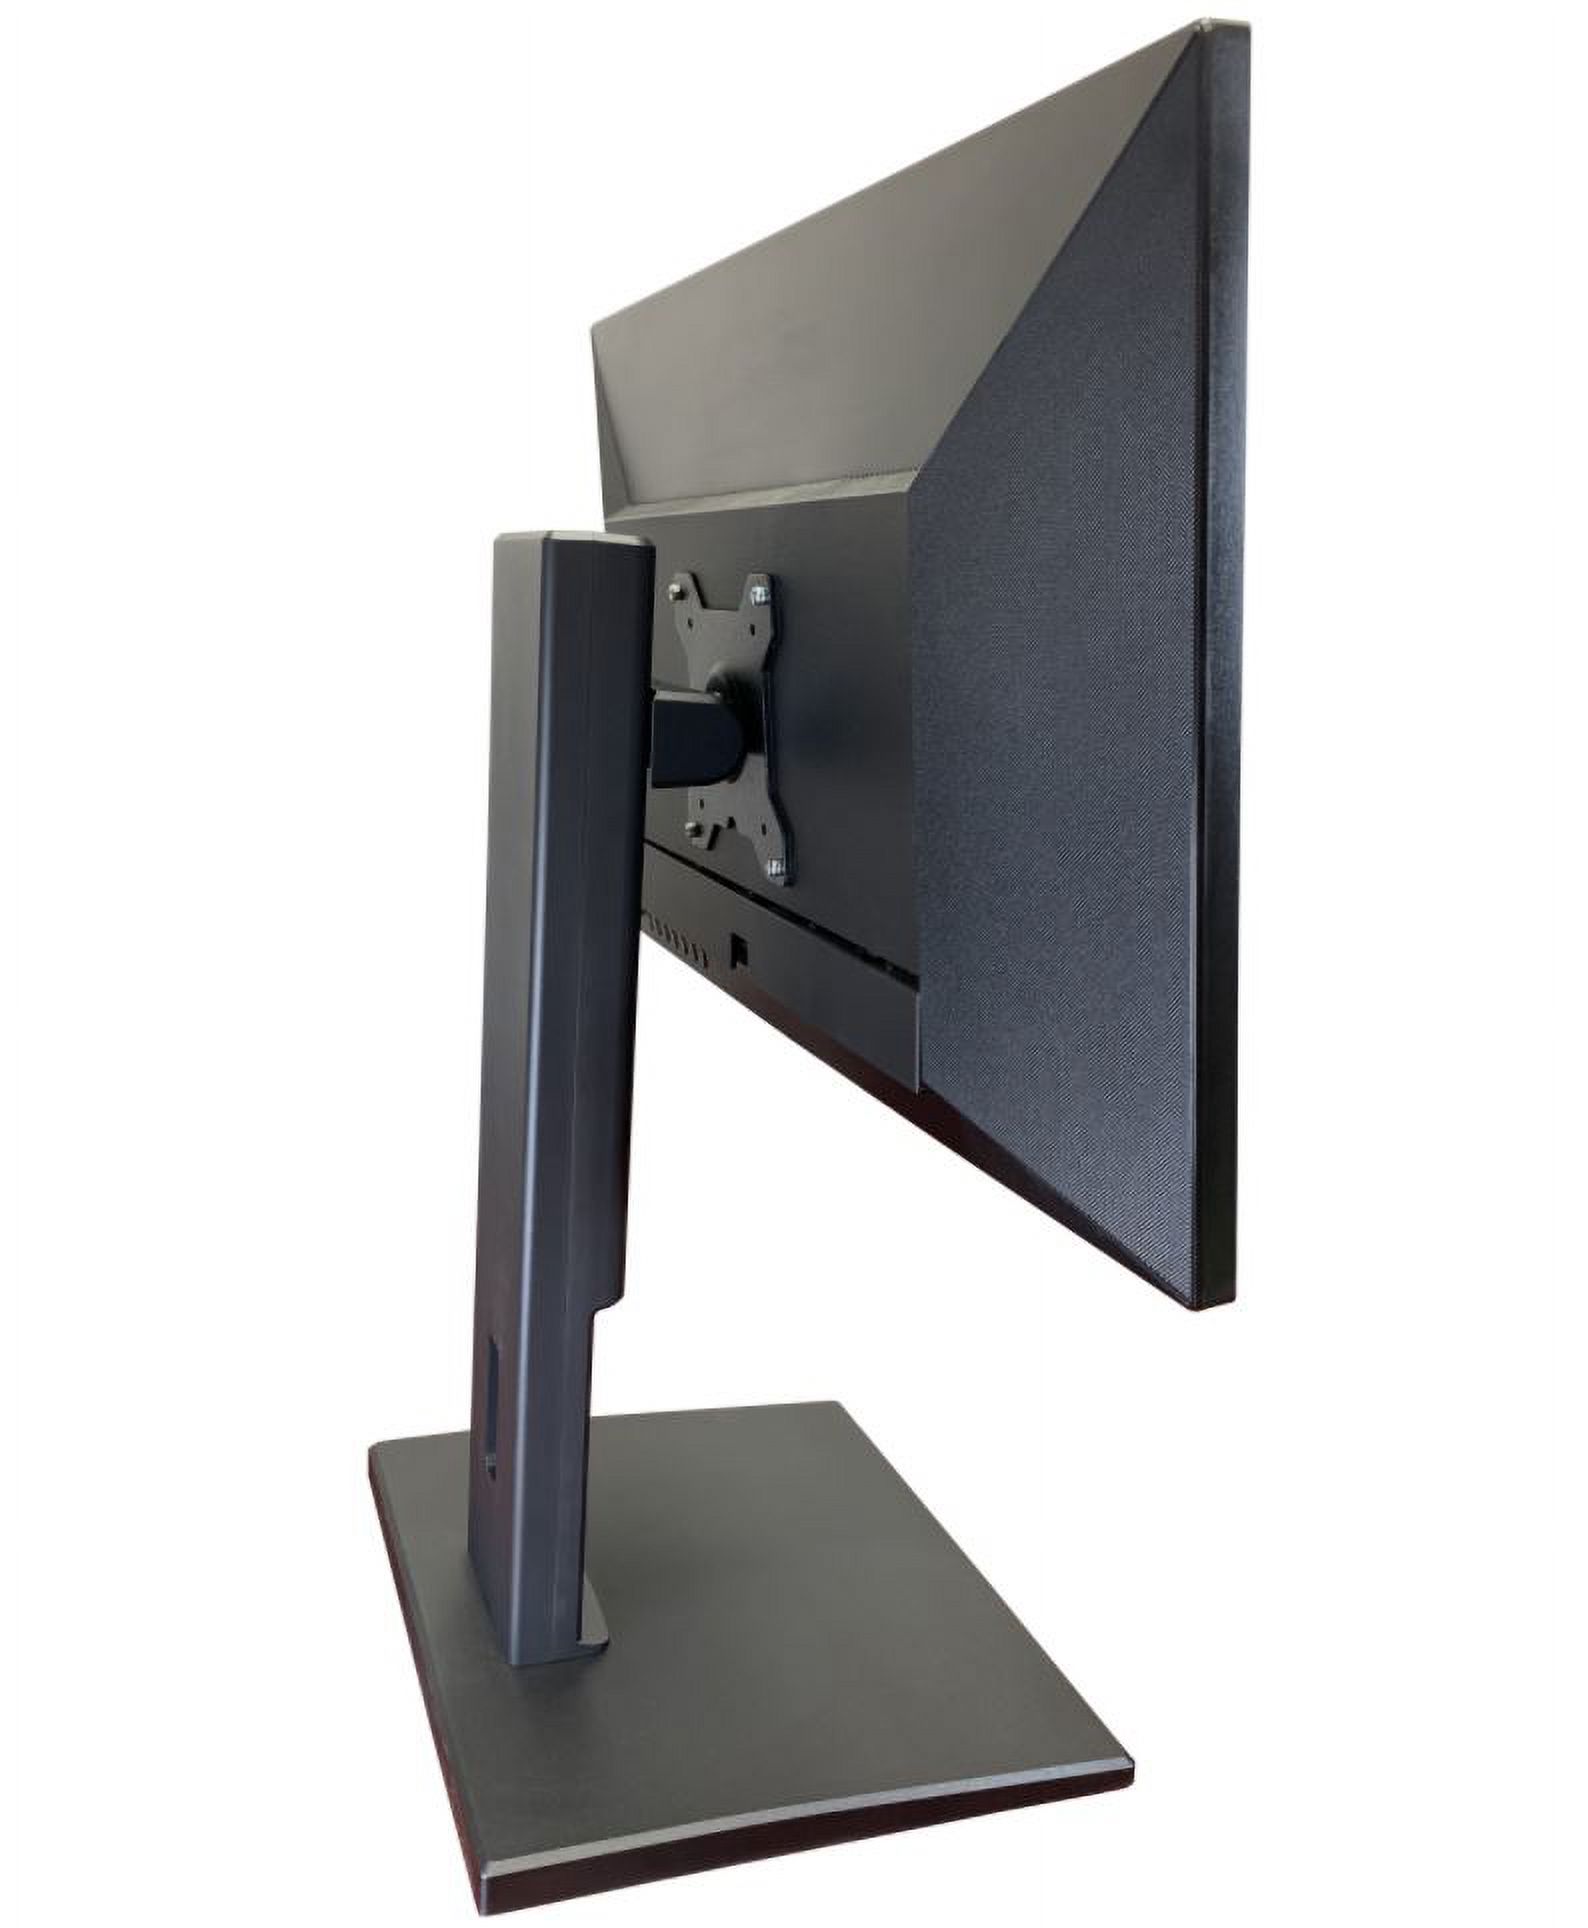 Amer Networks Single Flat Panel Monitor Stand With VESA Mounting Support, Black - image 2 of 2